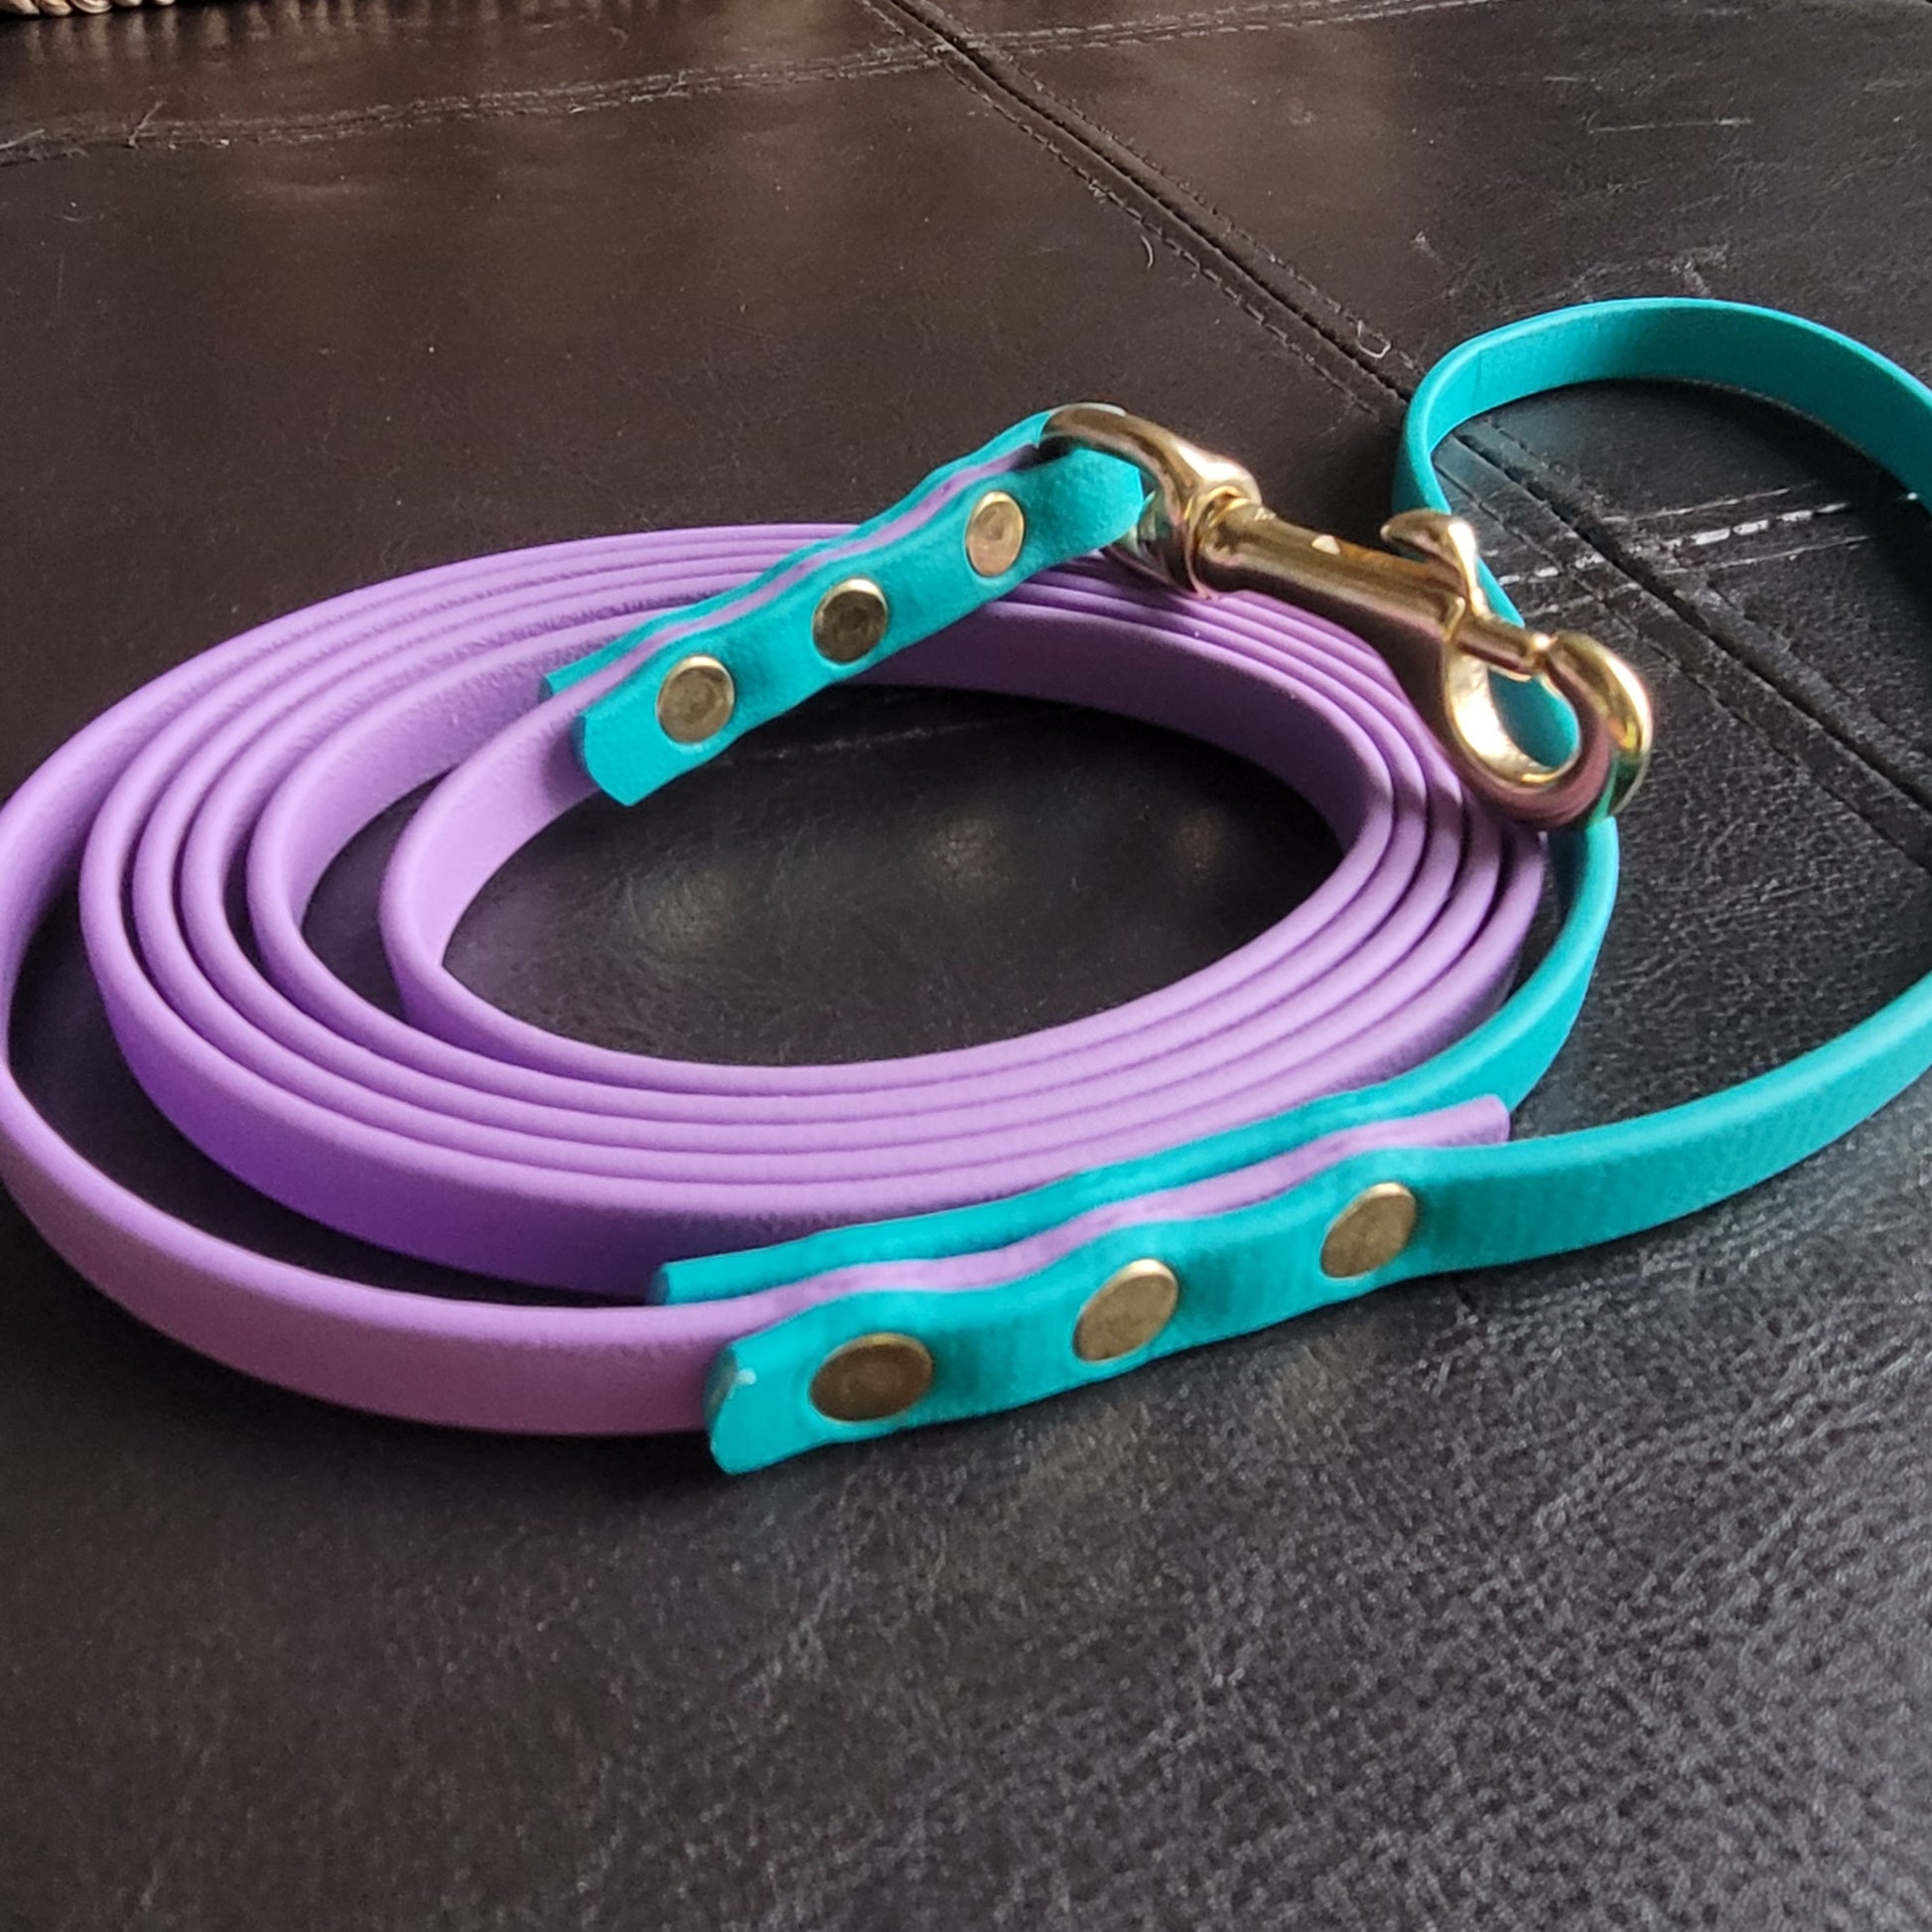 Durable Biothane Leashes for Dogs